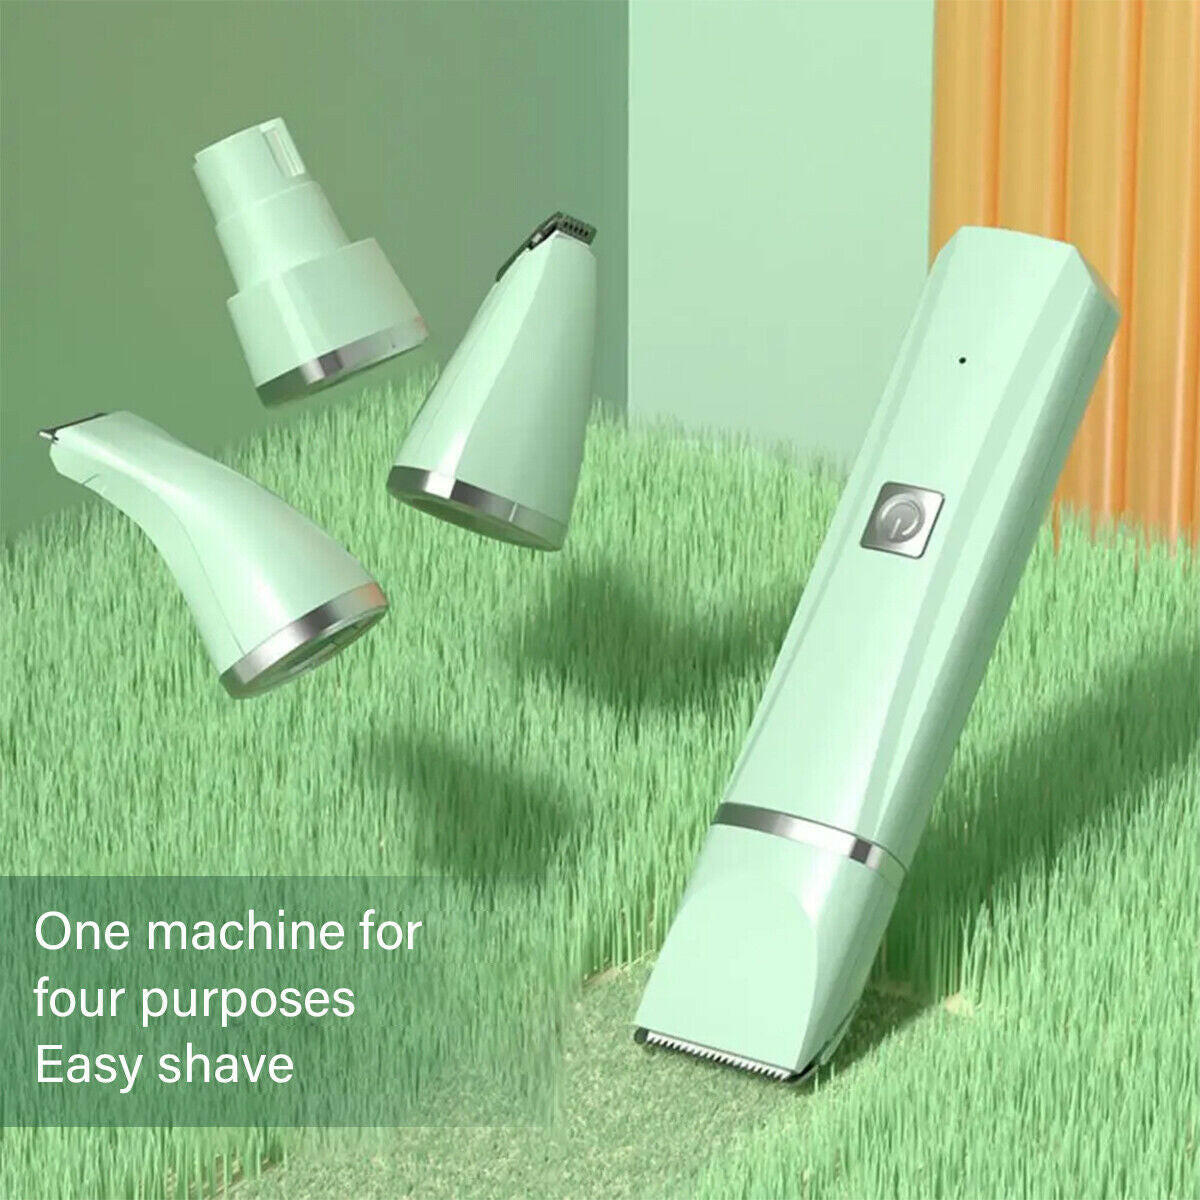 Pro Dog Grooming Clipper: Electric Trimmer Set for Thick Fur